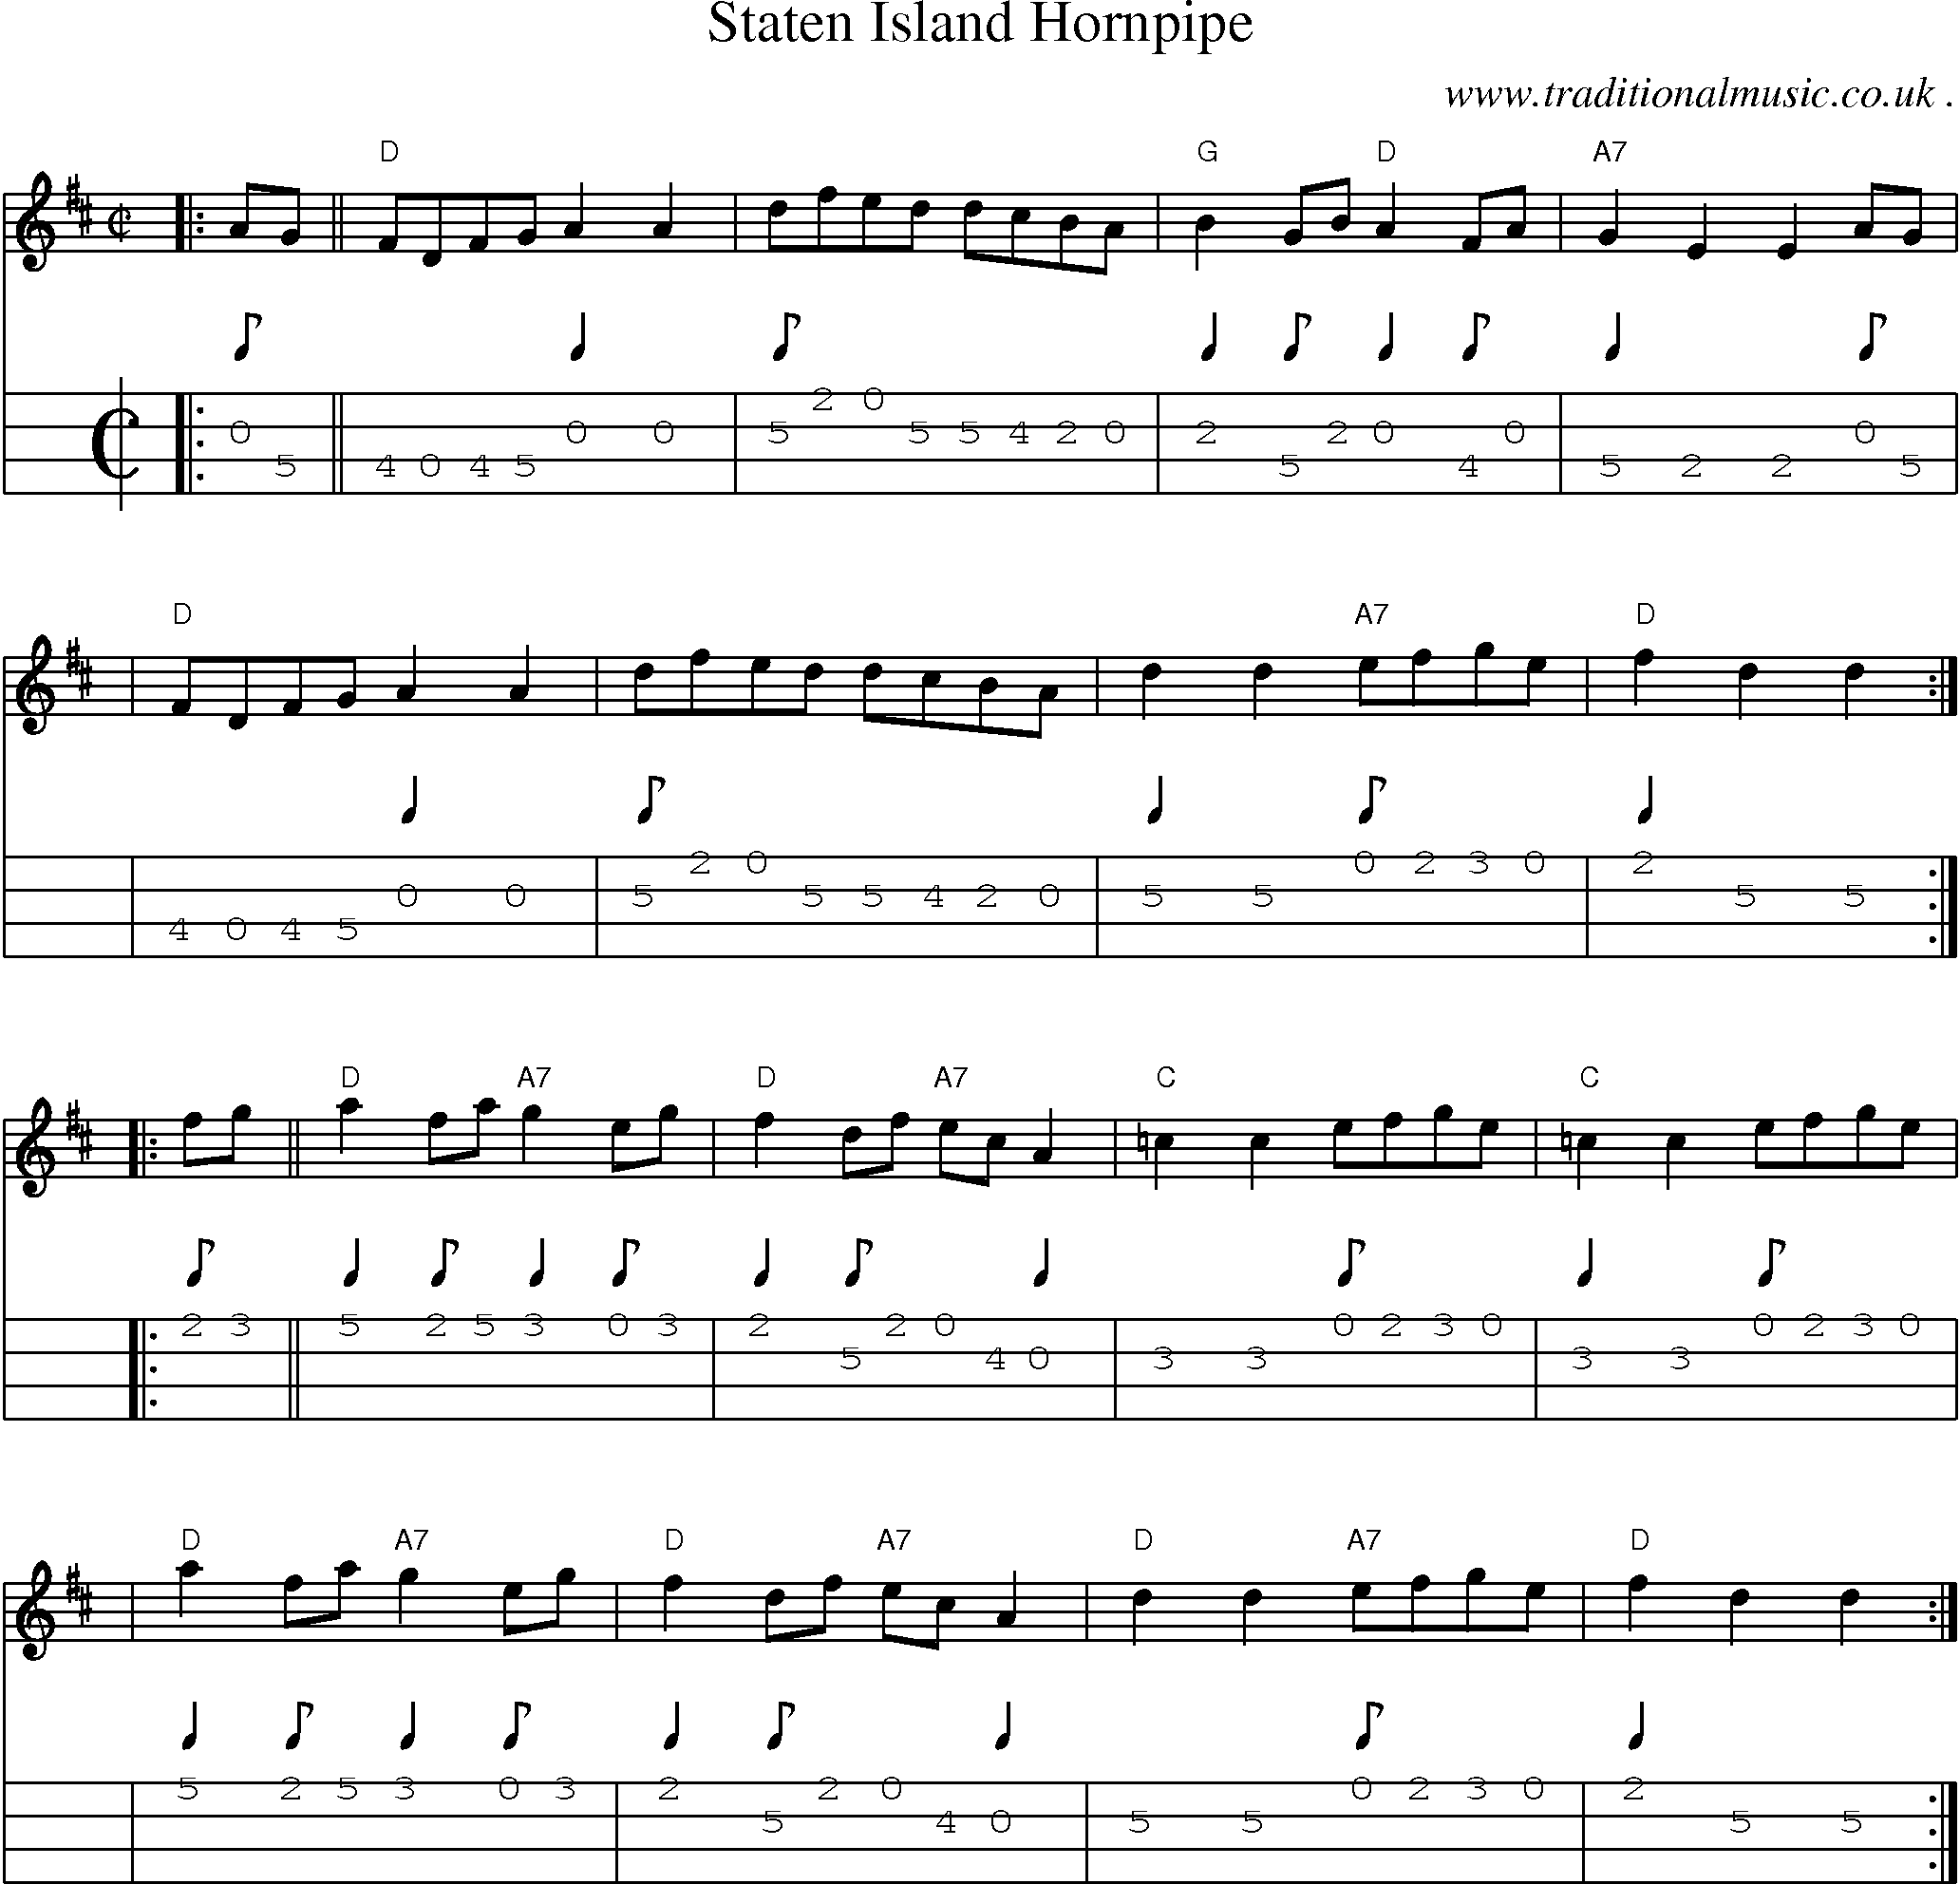 Sheet-music  score, Chords and Mandolin Tabs for Staten Island Hornpipe